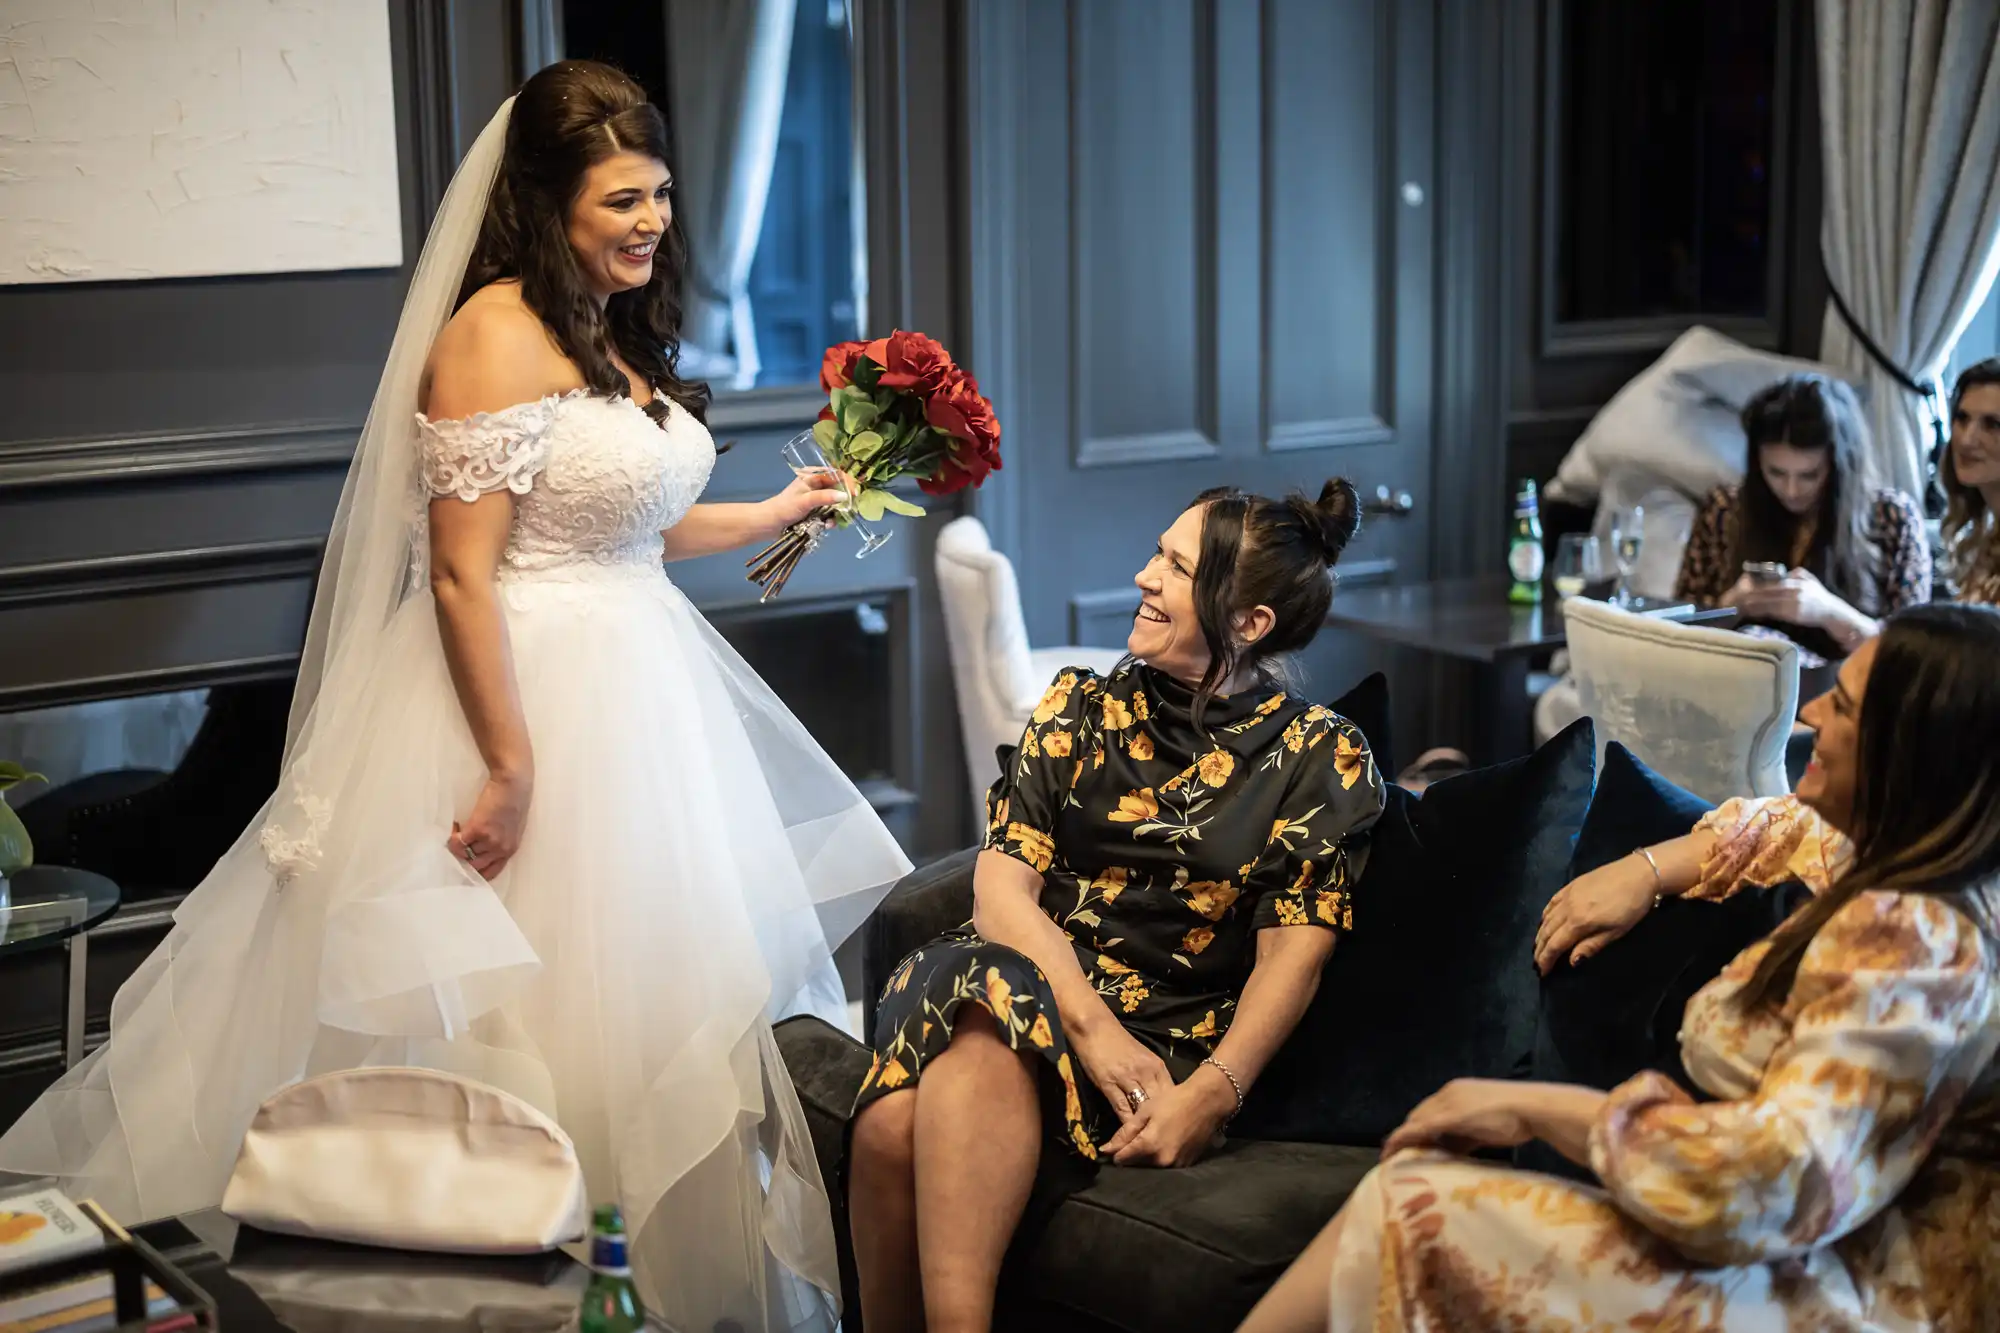 A bride in a white dress and veil holds a bouquet of red roses while talking to two seated women. Others are visible in the background, including a woman using a smartphone.